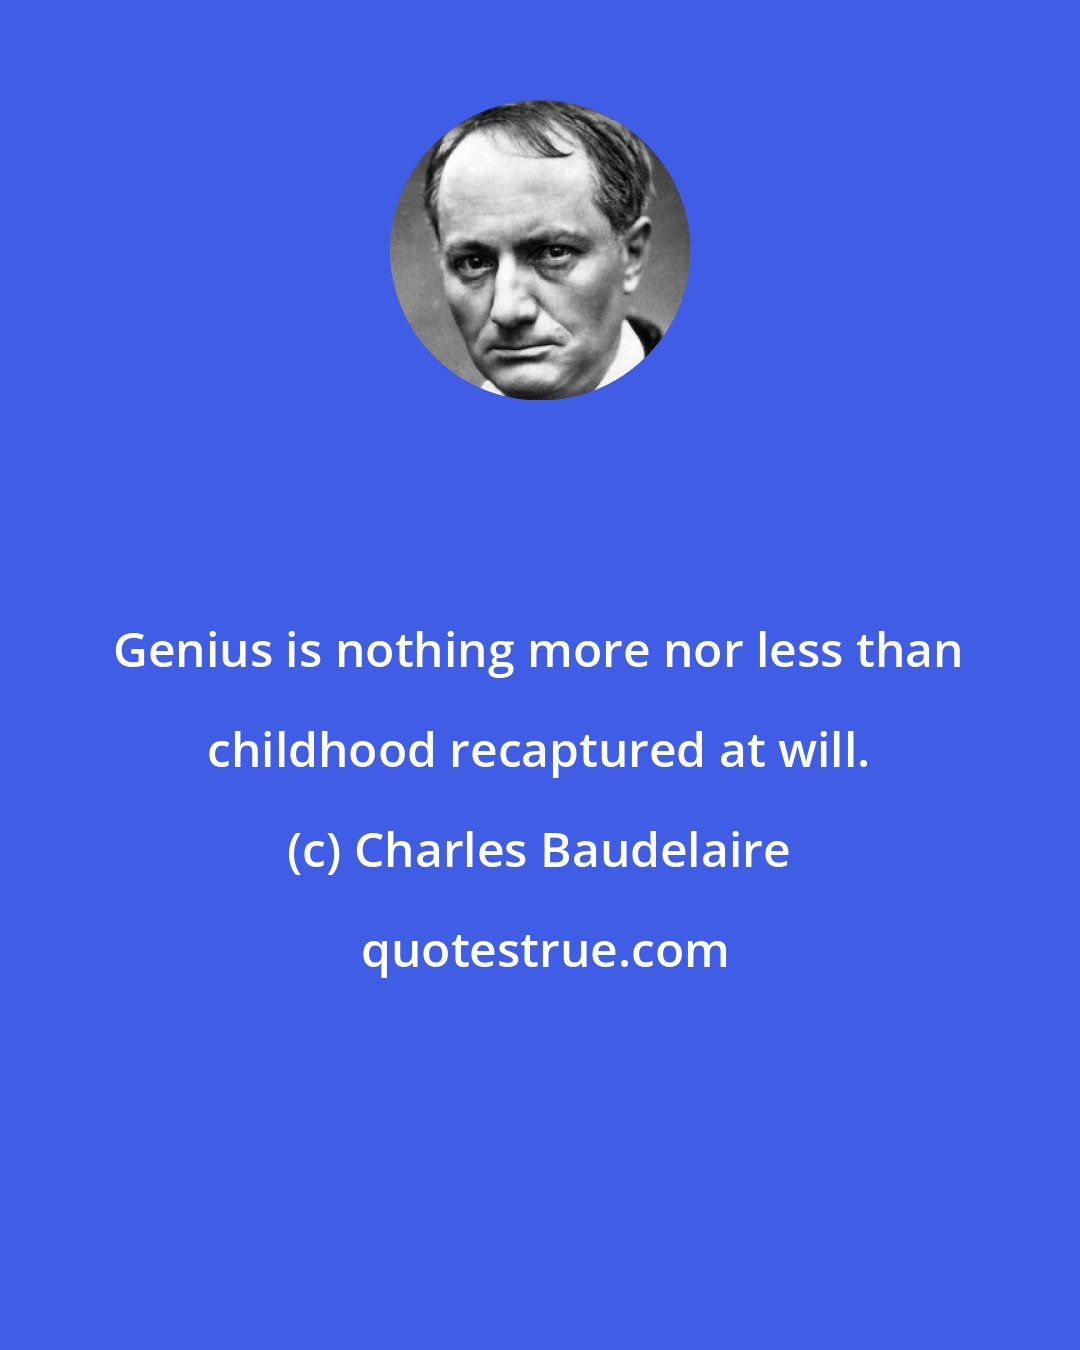 Charles Baudelaire: Genius is nothing more nor less than childhood recaptured at will.